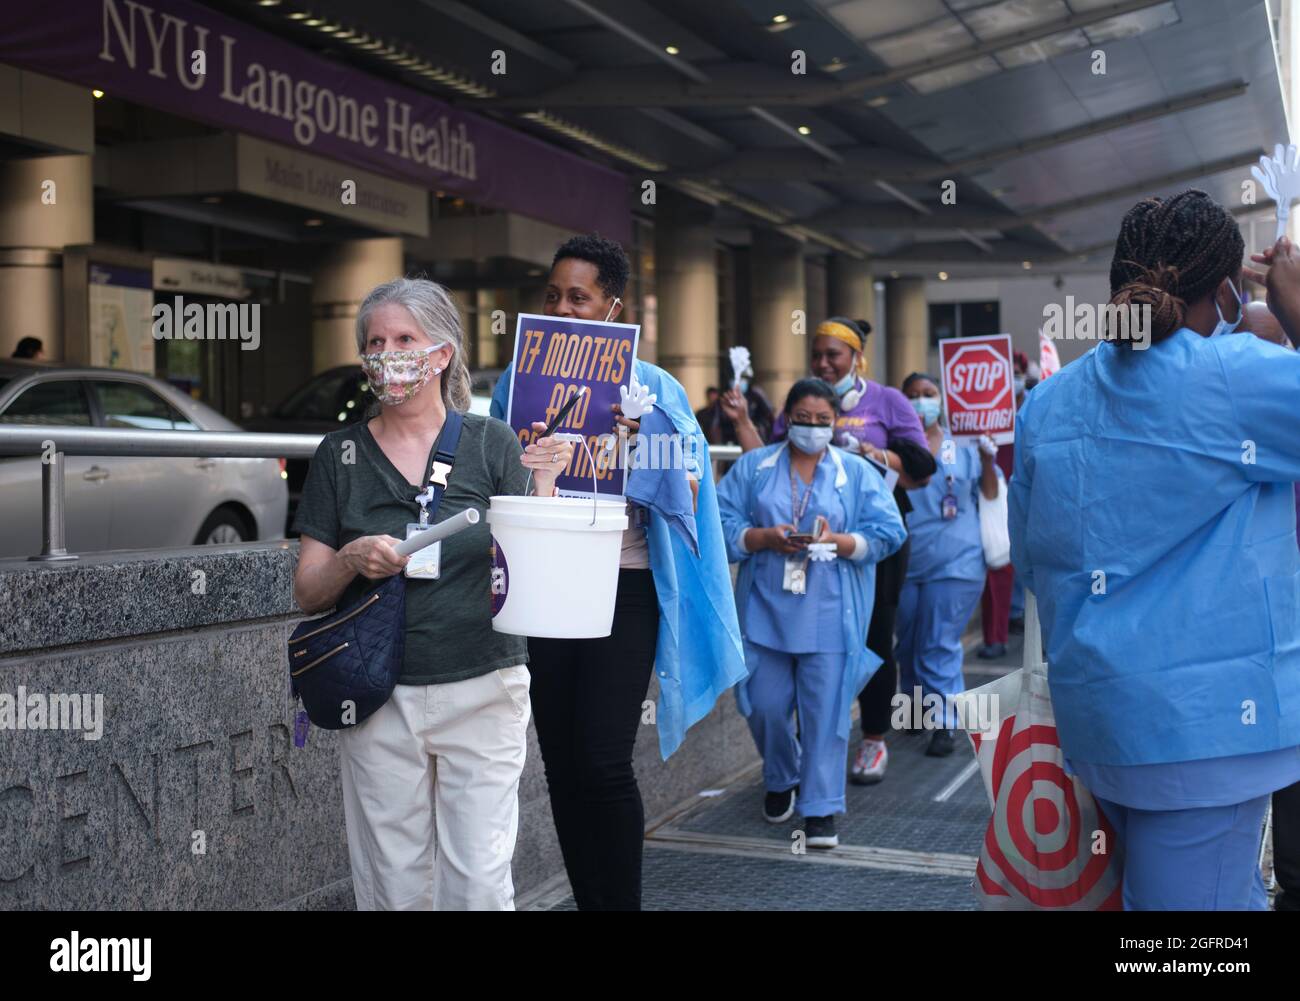 Brooklyn, New York, USA. 26th Aug, 2021. NYU Langone employees represented by the 1199 SEIU United Healthcare Workers union, in front of NYU hospital's main entrance at 560 1st